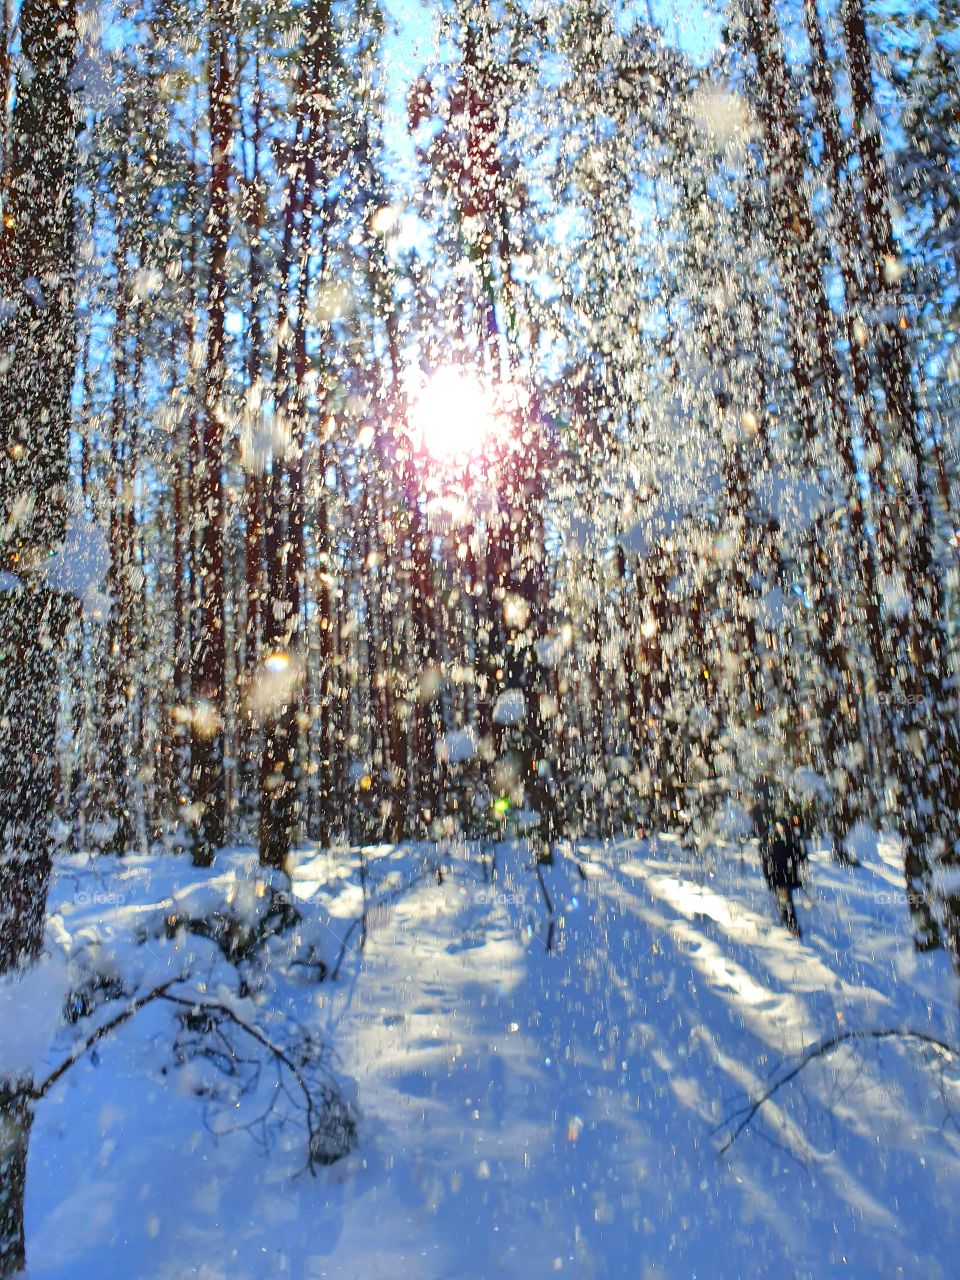 Sun and snow are the perfect combinations.